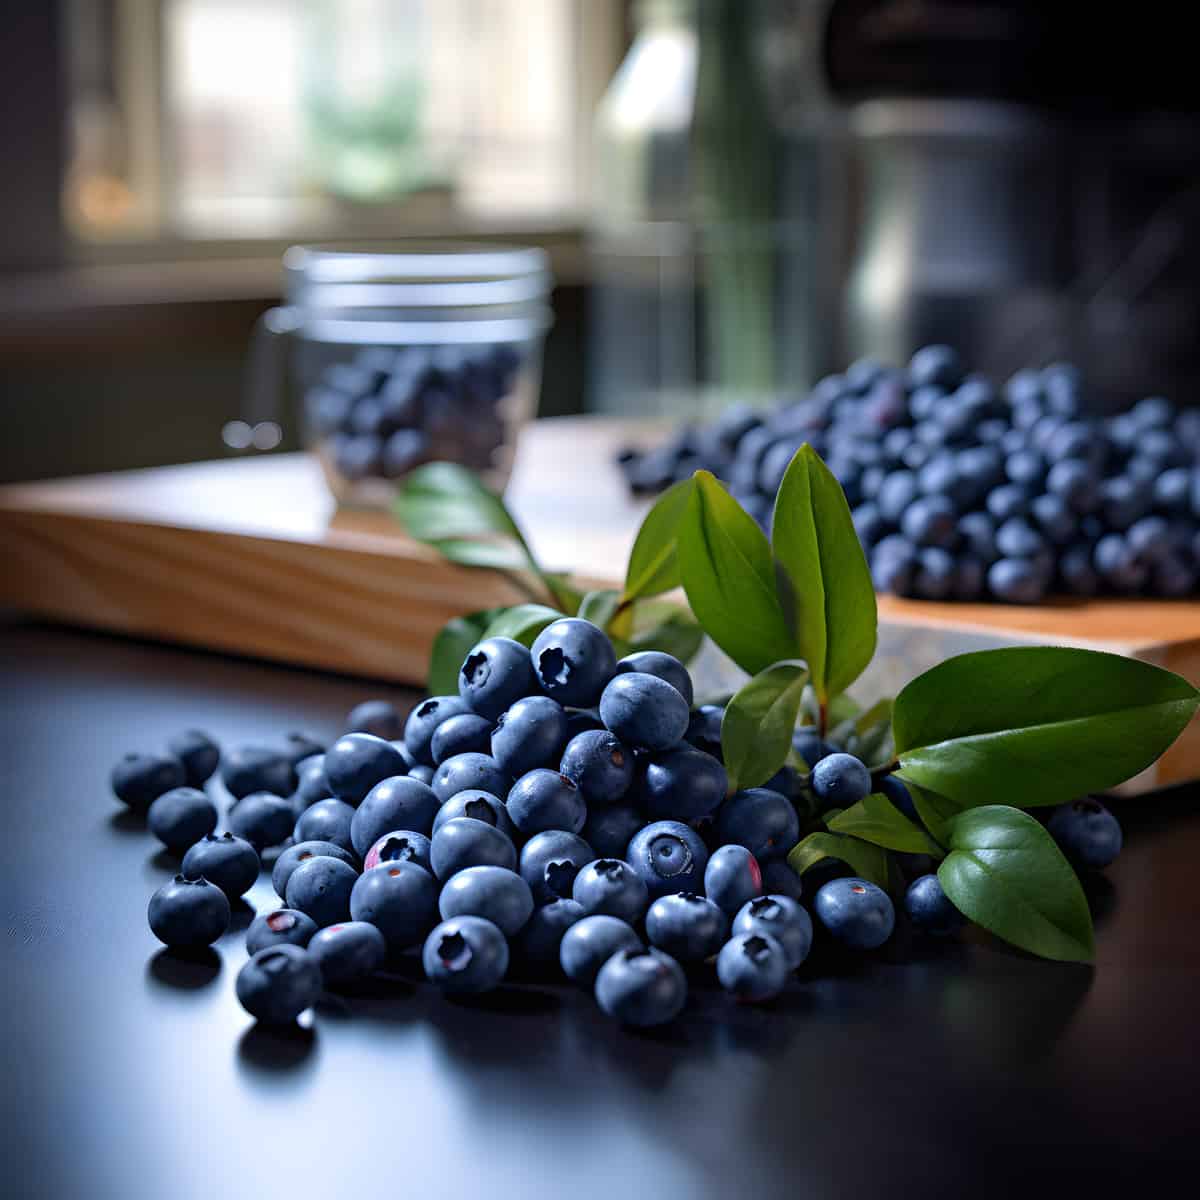 Bilberries on a kitchen counter